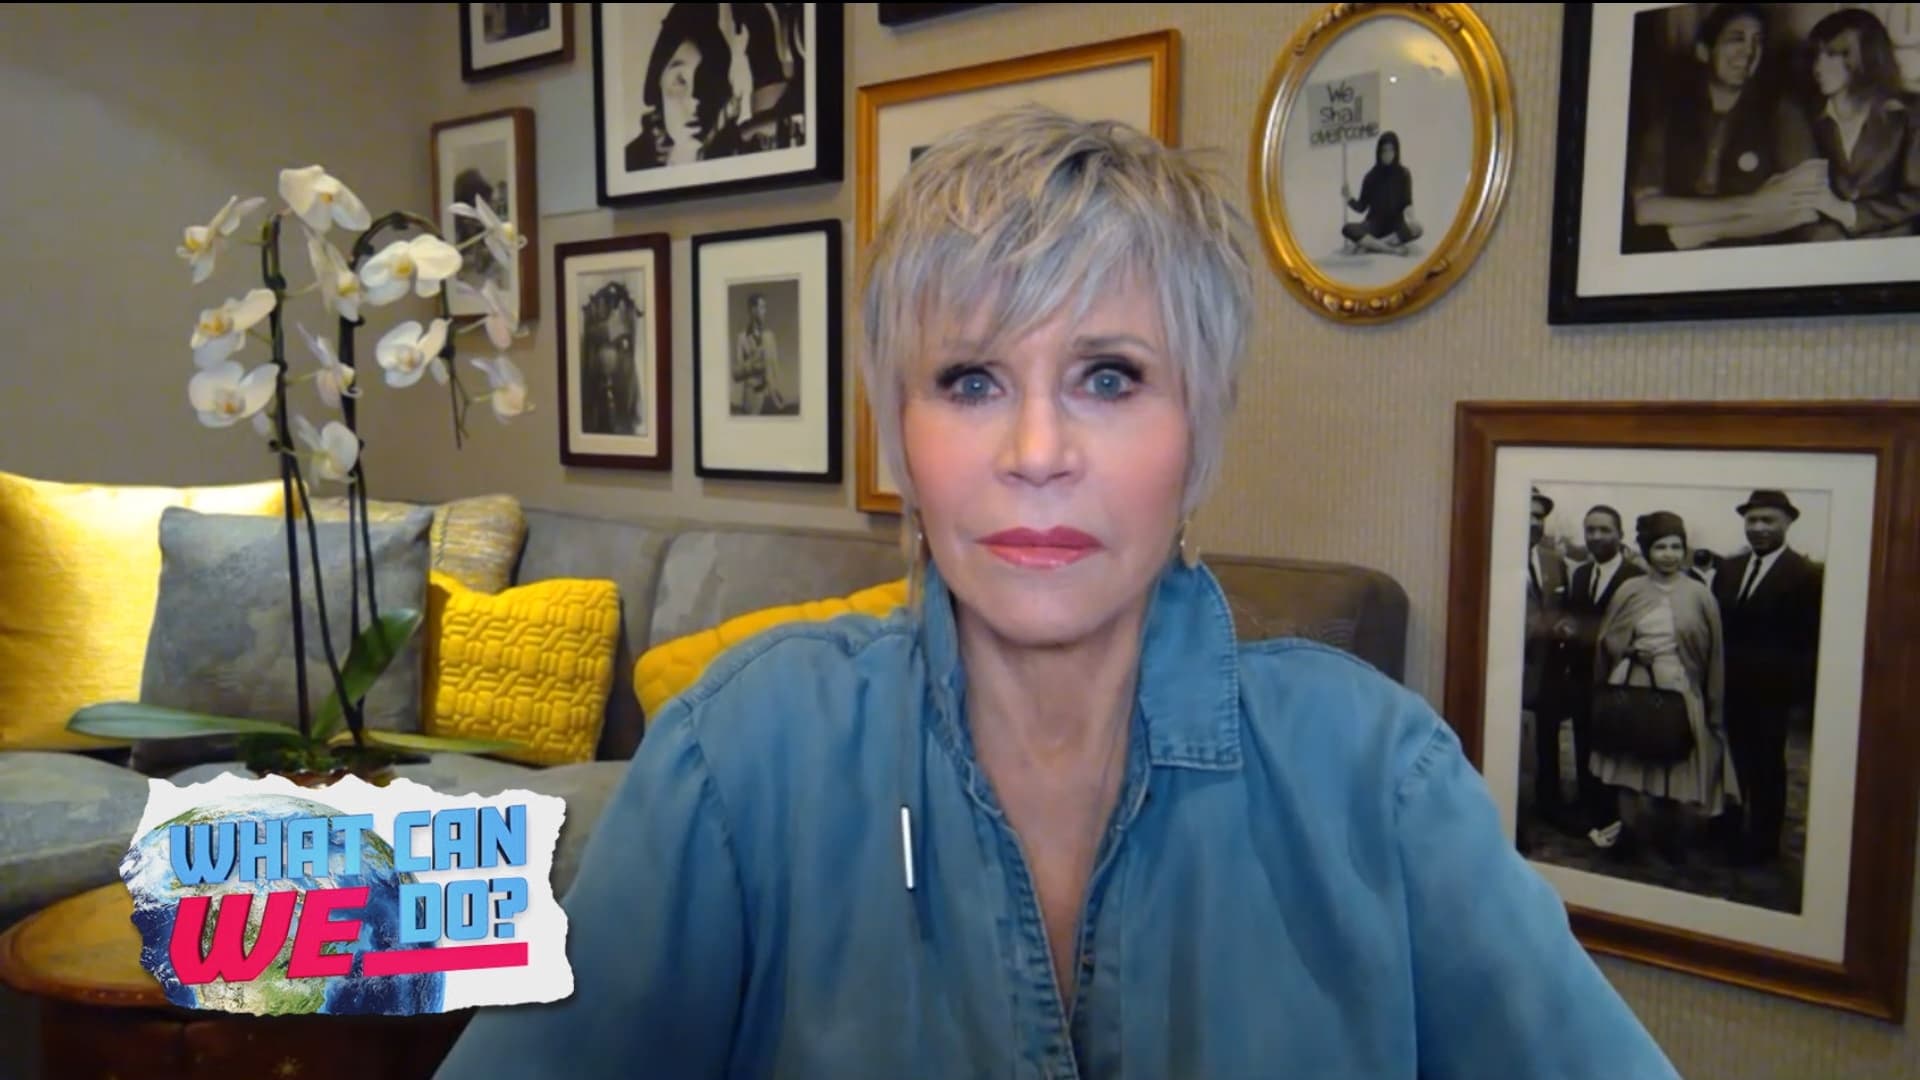 Watch What Happens Live with Andy Cohen Season 17 :Episode 146  Jane Fonda